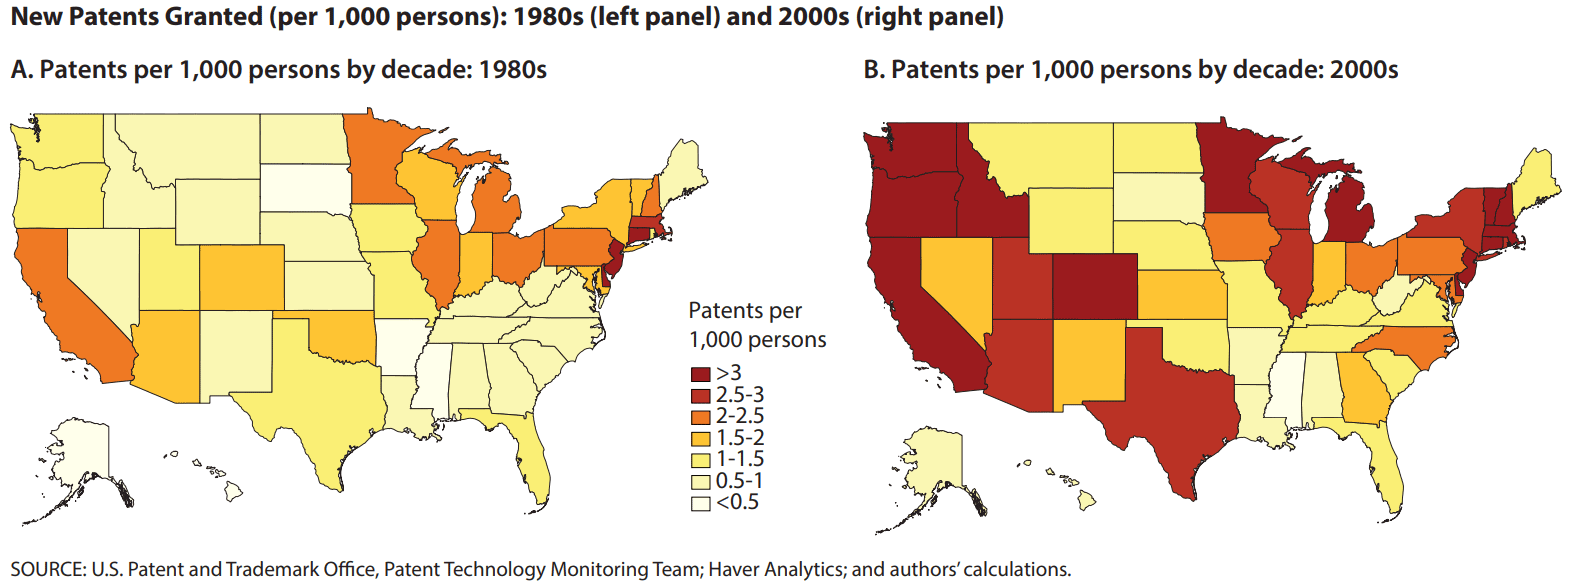 Comparative map sshowing patents per 1,000 persons in the US by decades for the 1980s to 2000s